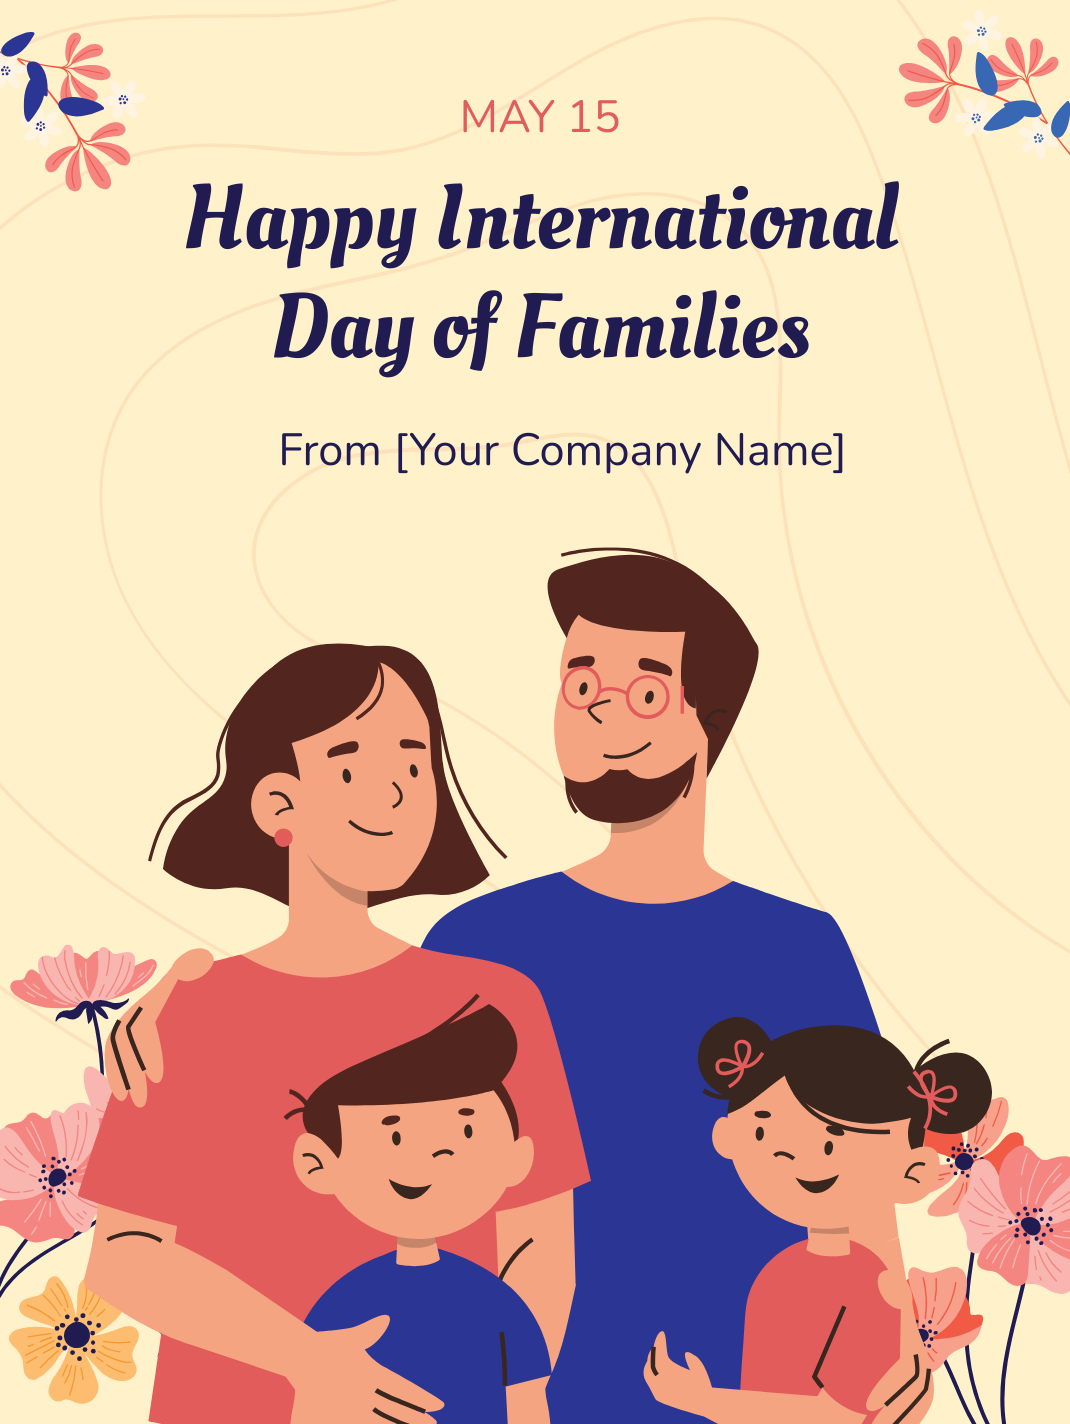 Free Happy International Day of Families Template